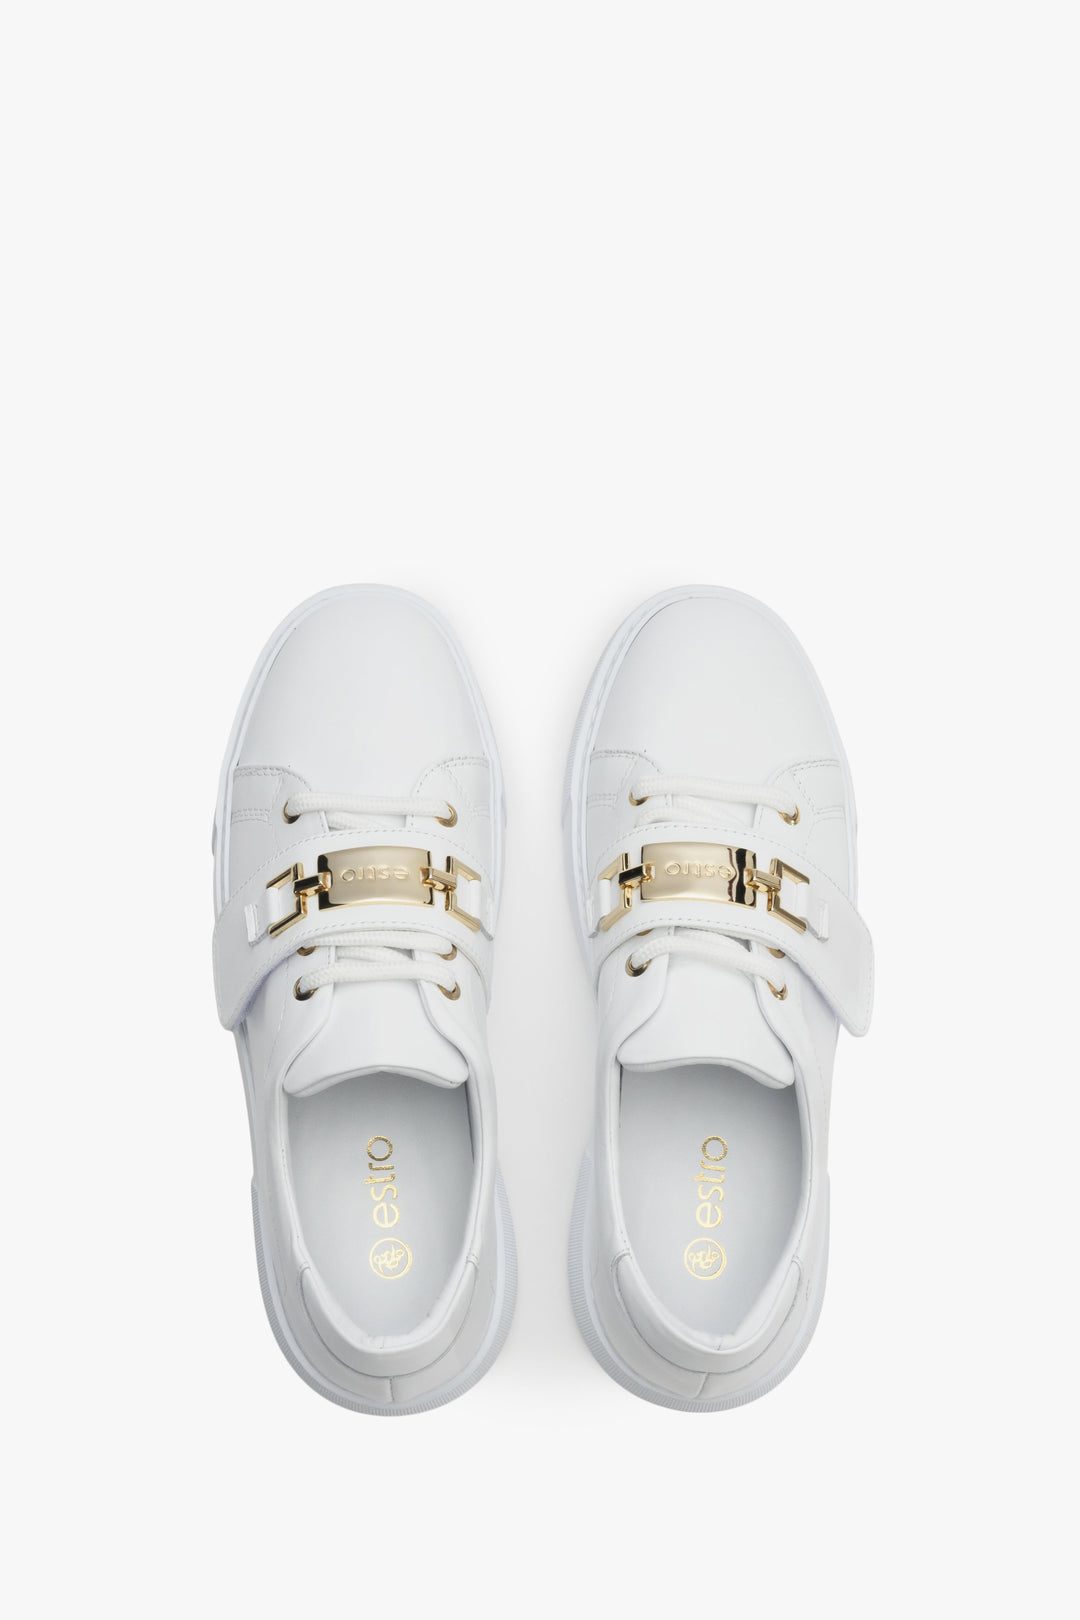 Women's white sneakers made of genuine leather with gold accents - top view shoe presentation.